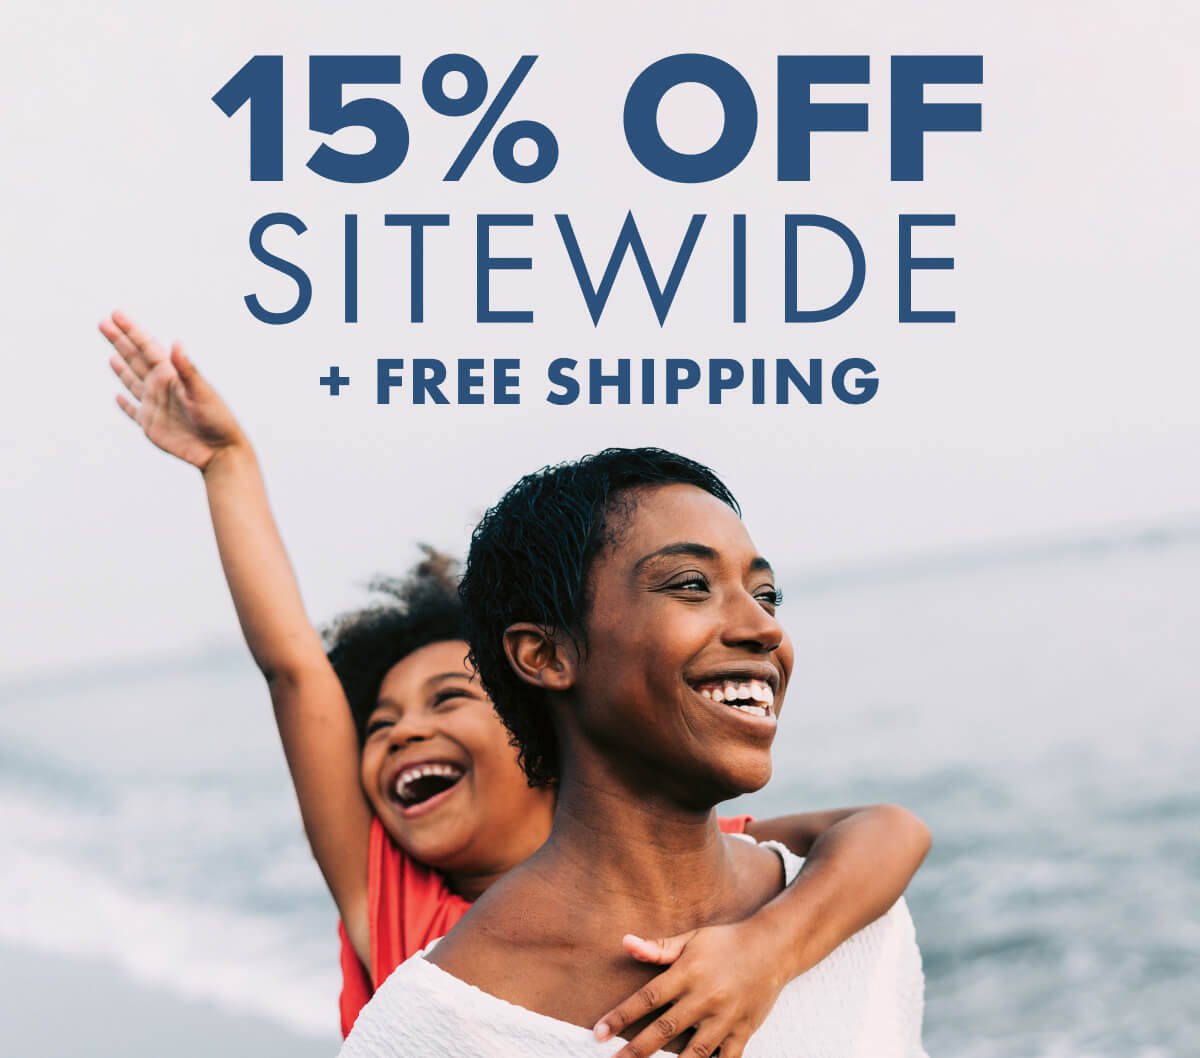 15% OFF SITEWIDE + FREE SHIPPING